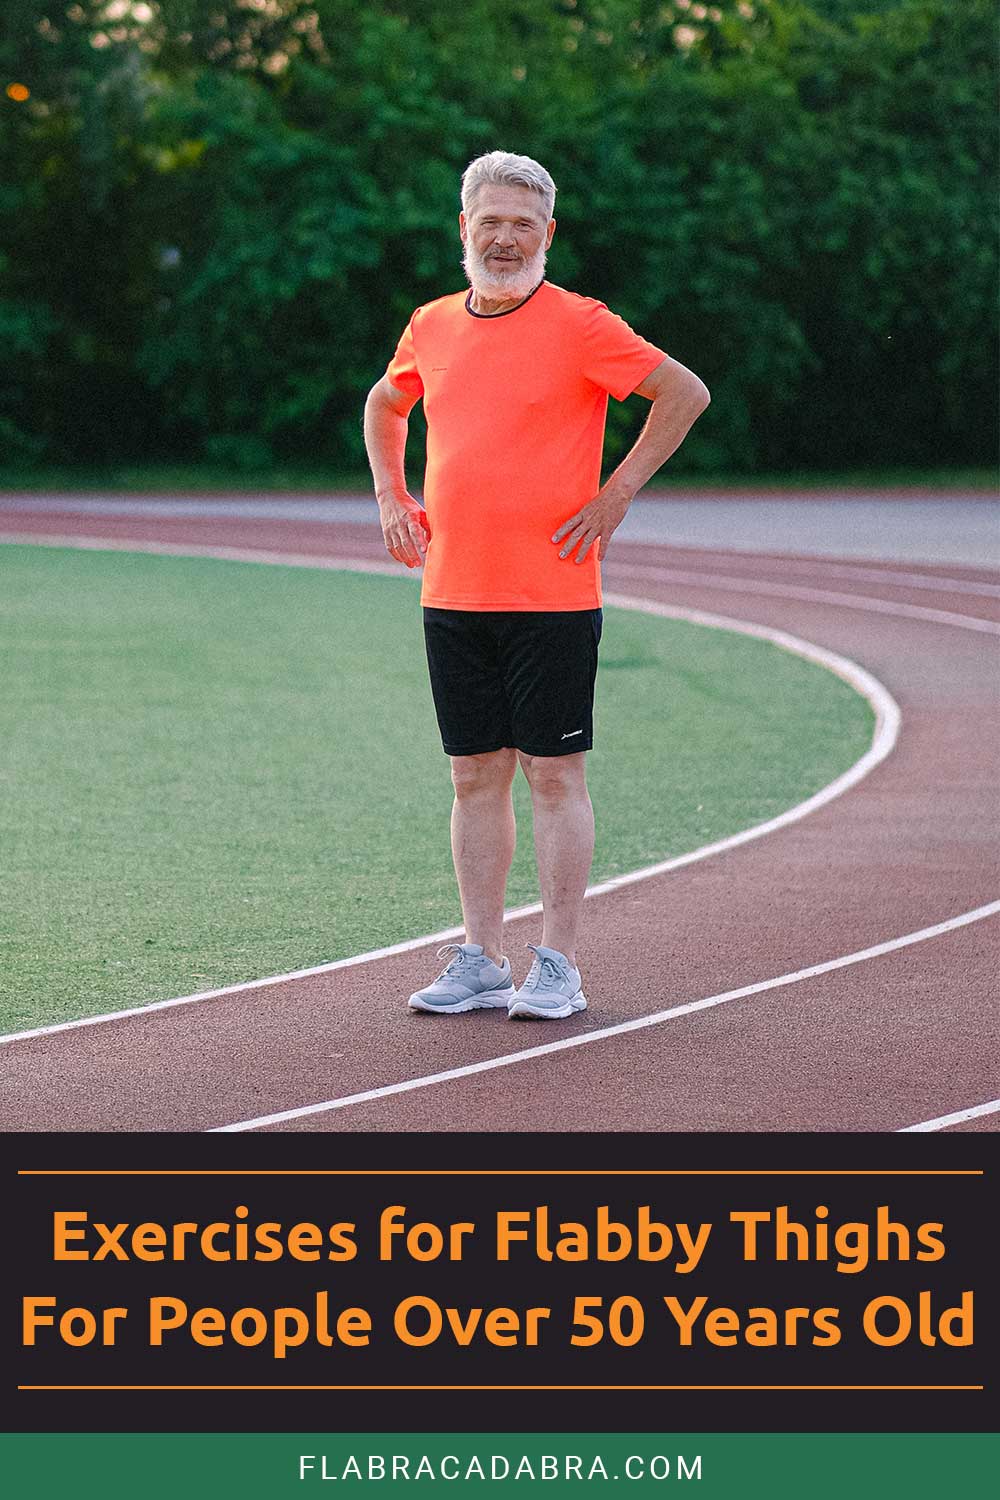 Exercises for Flabby Thighs For People Over 50 Years Old